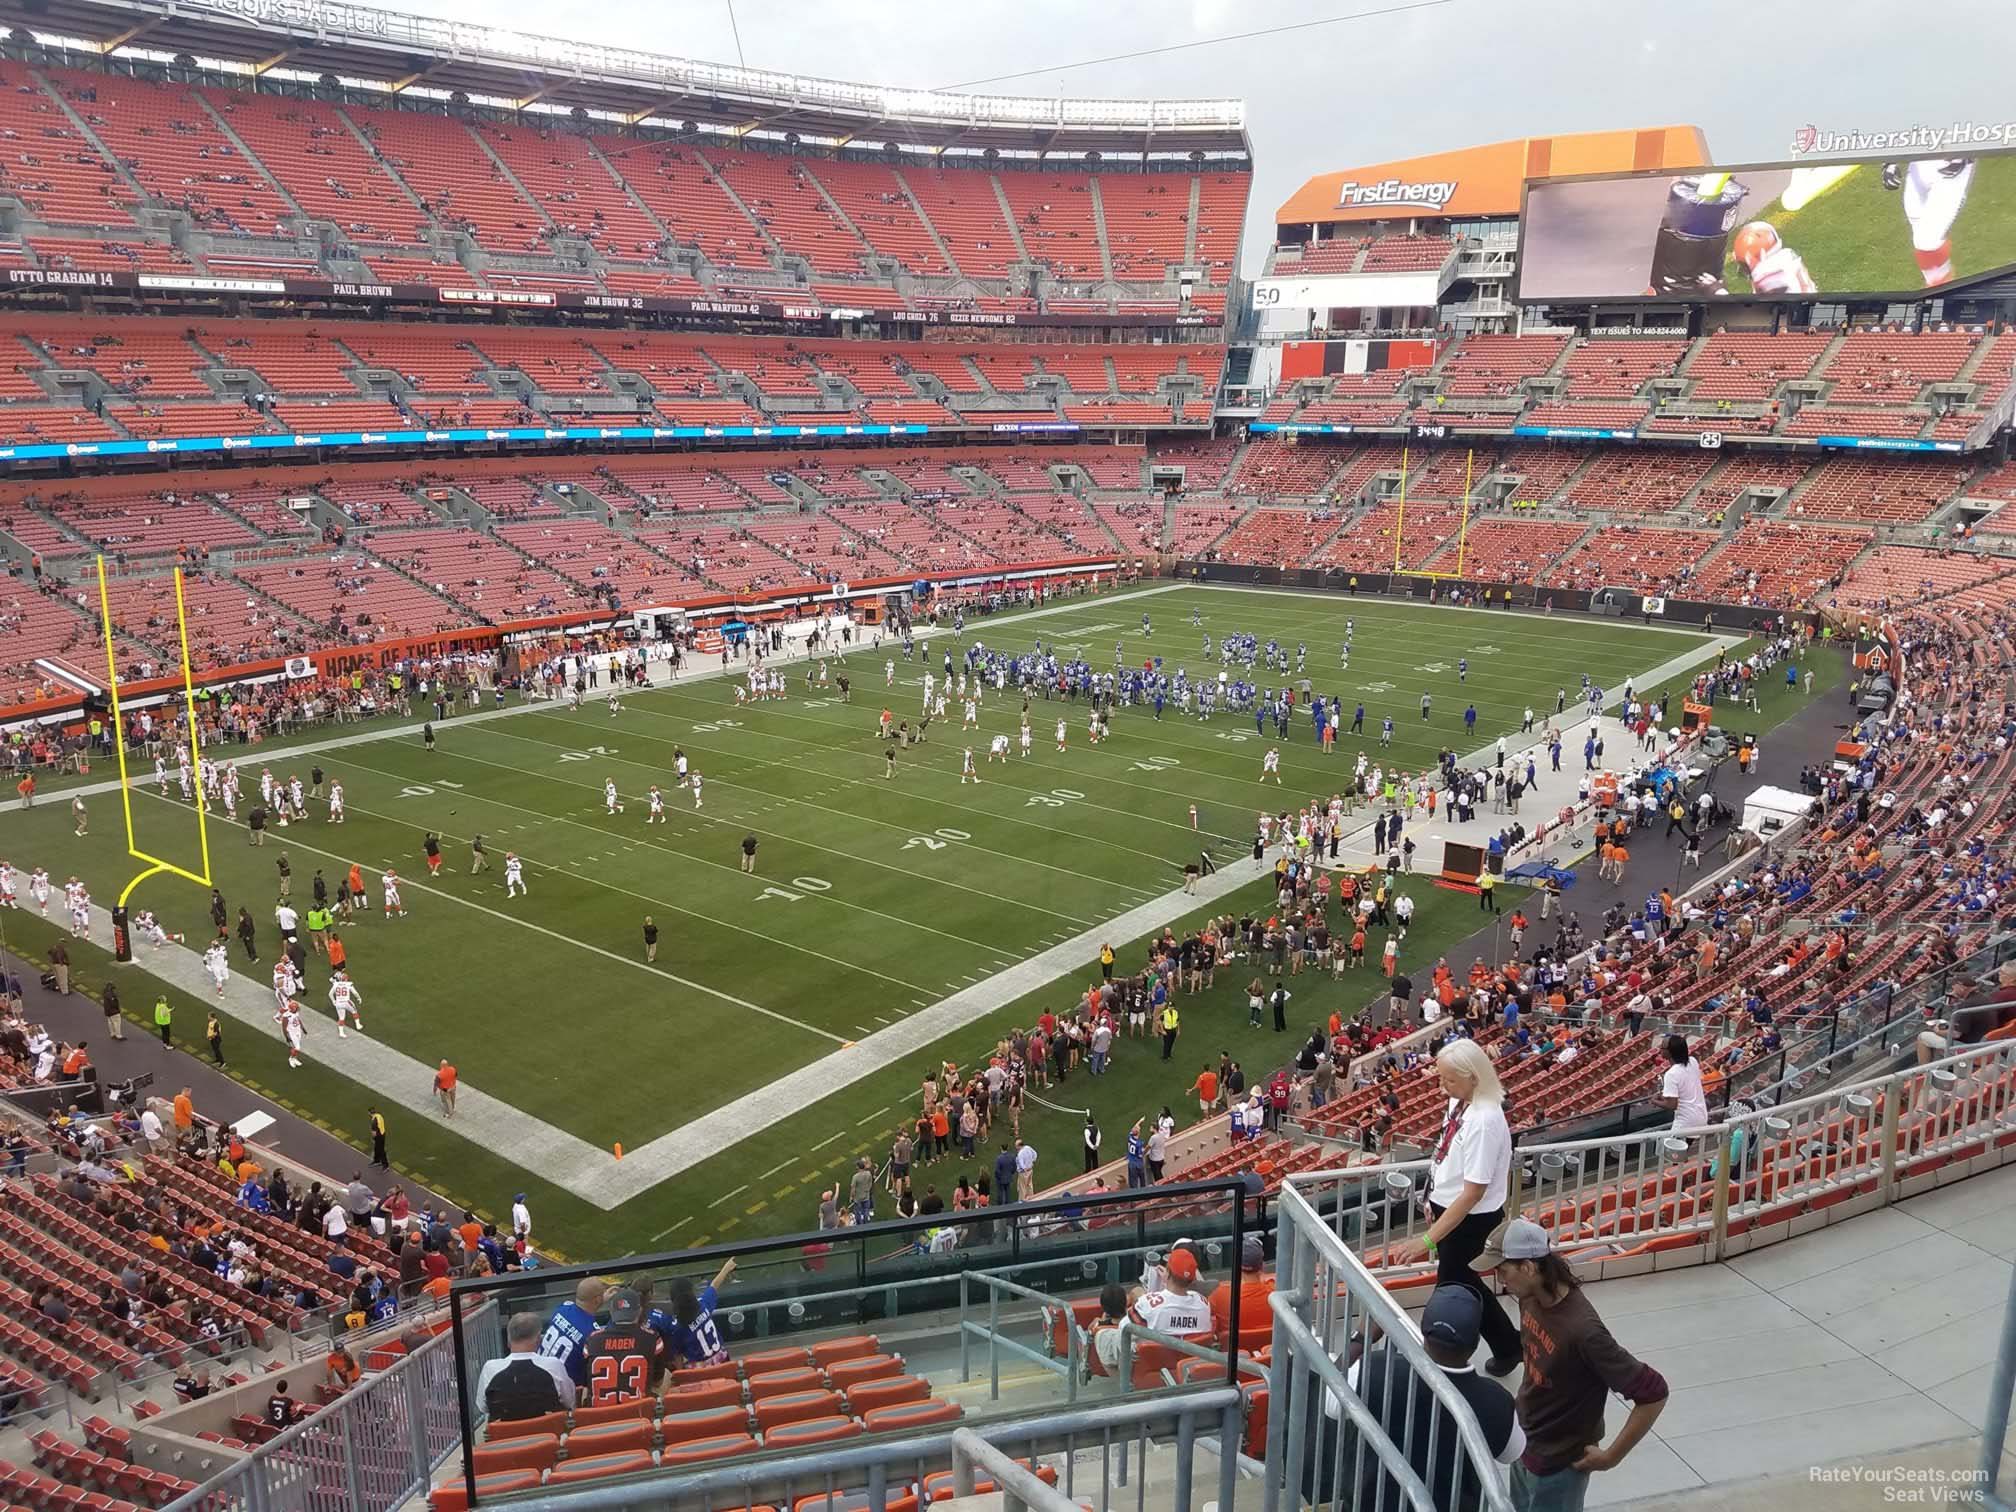 section 301, row 14 seat view  - cleveland browns stadium